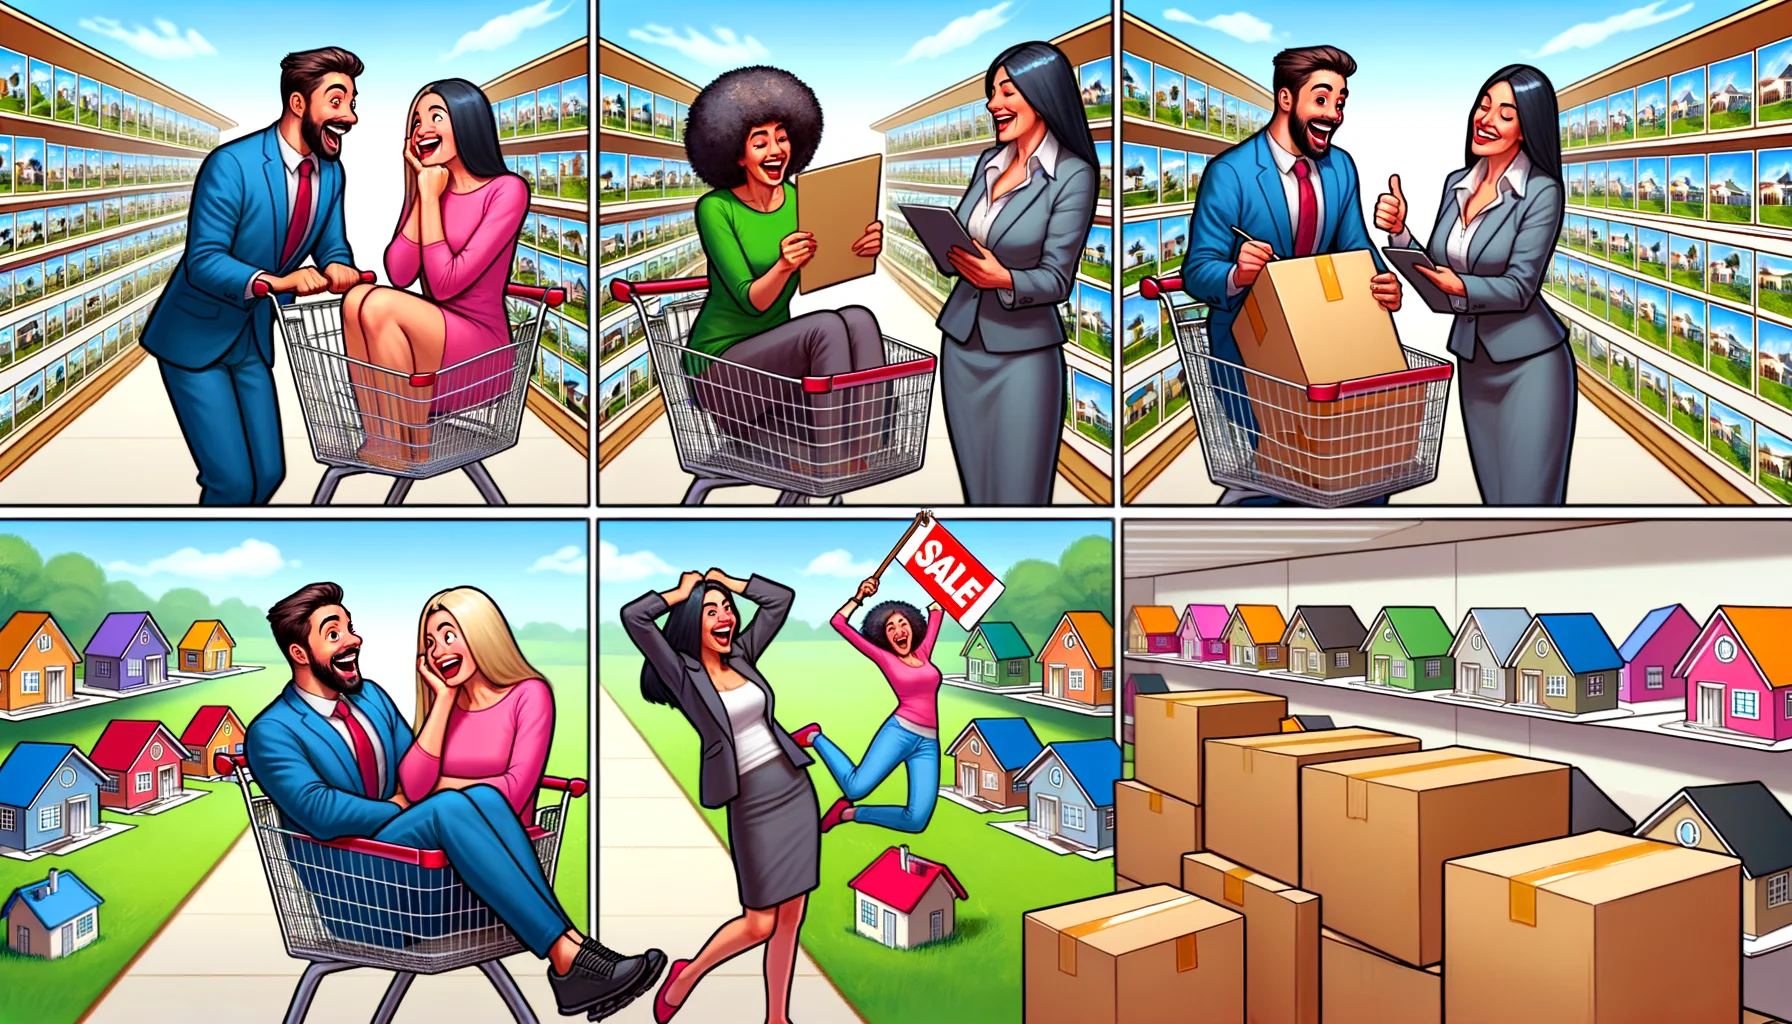 Picture a lively and humorous scene of the ideal home buying process for novices. It starts with an enthusiastic, mixed-race couple in their late twenties, examining a variety of identical houses lined up like items on a supermarket shelf. They're in a giant shopping cart, cheerily riding down the aisle and picking their favourite house. The next snapshot shows a Hispanic woman in formal attire, assumably a real estate agent, offering them a massive 'Sale' tag labelled with 'Perfect First Home'. The final snap is them, ecstatically unpacking cardboard boxes in their new pastel-coloured home. This comically encapsulates the perfectly smooth beginners home buying journey.